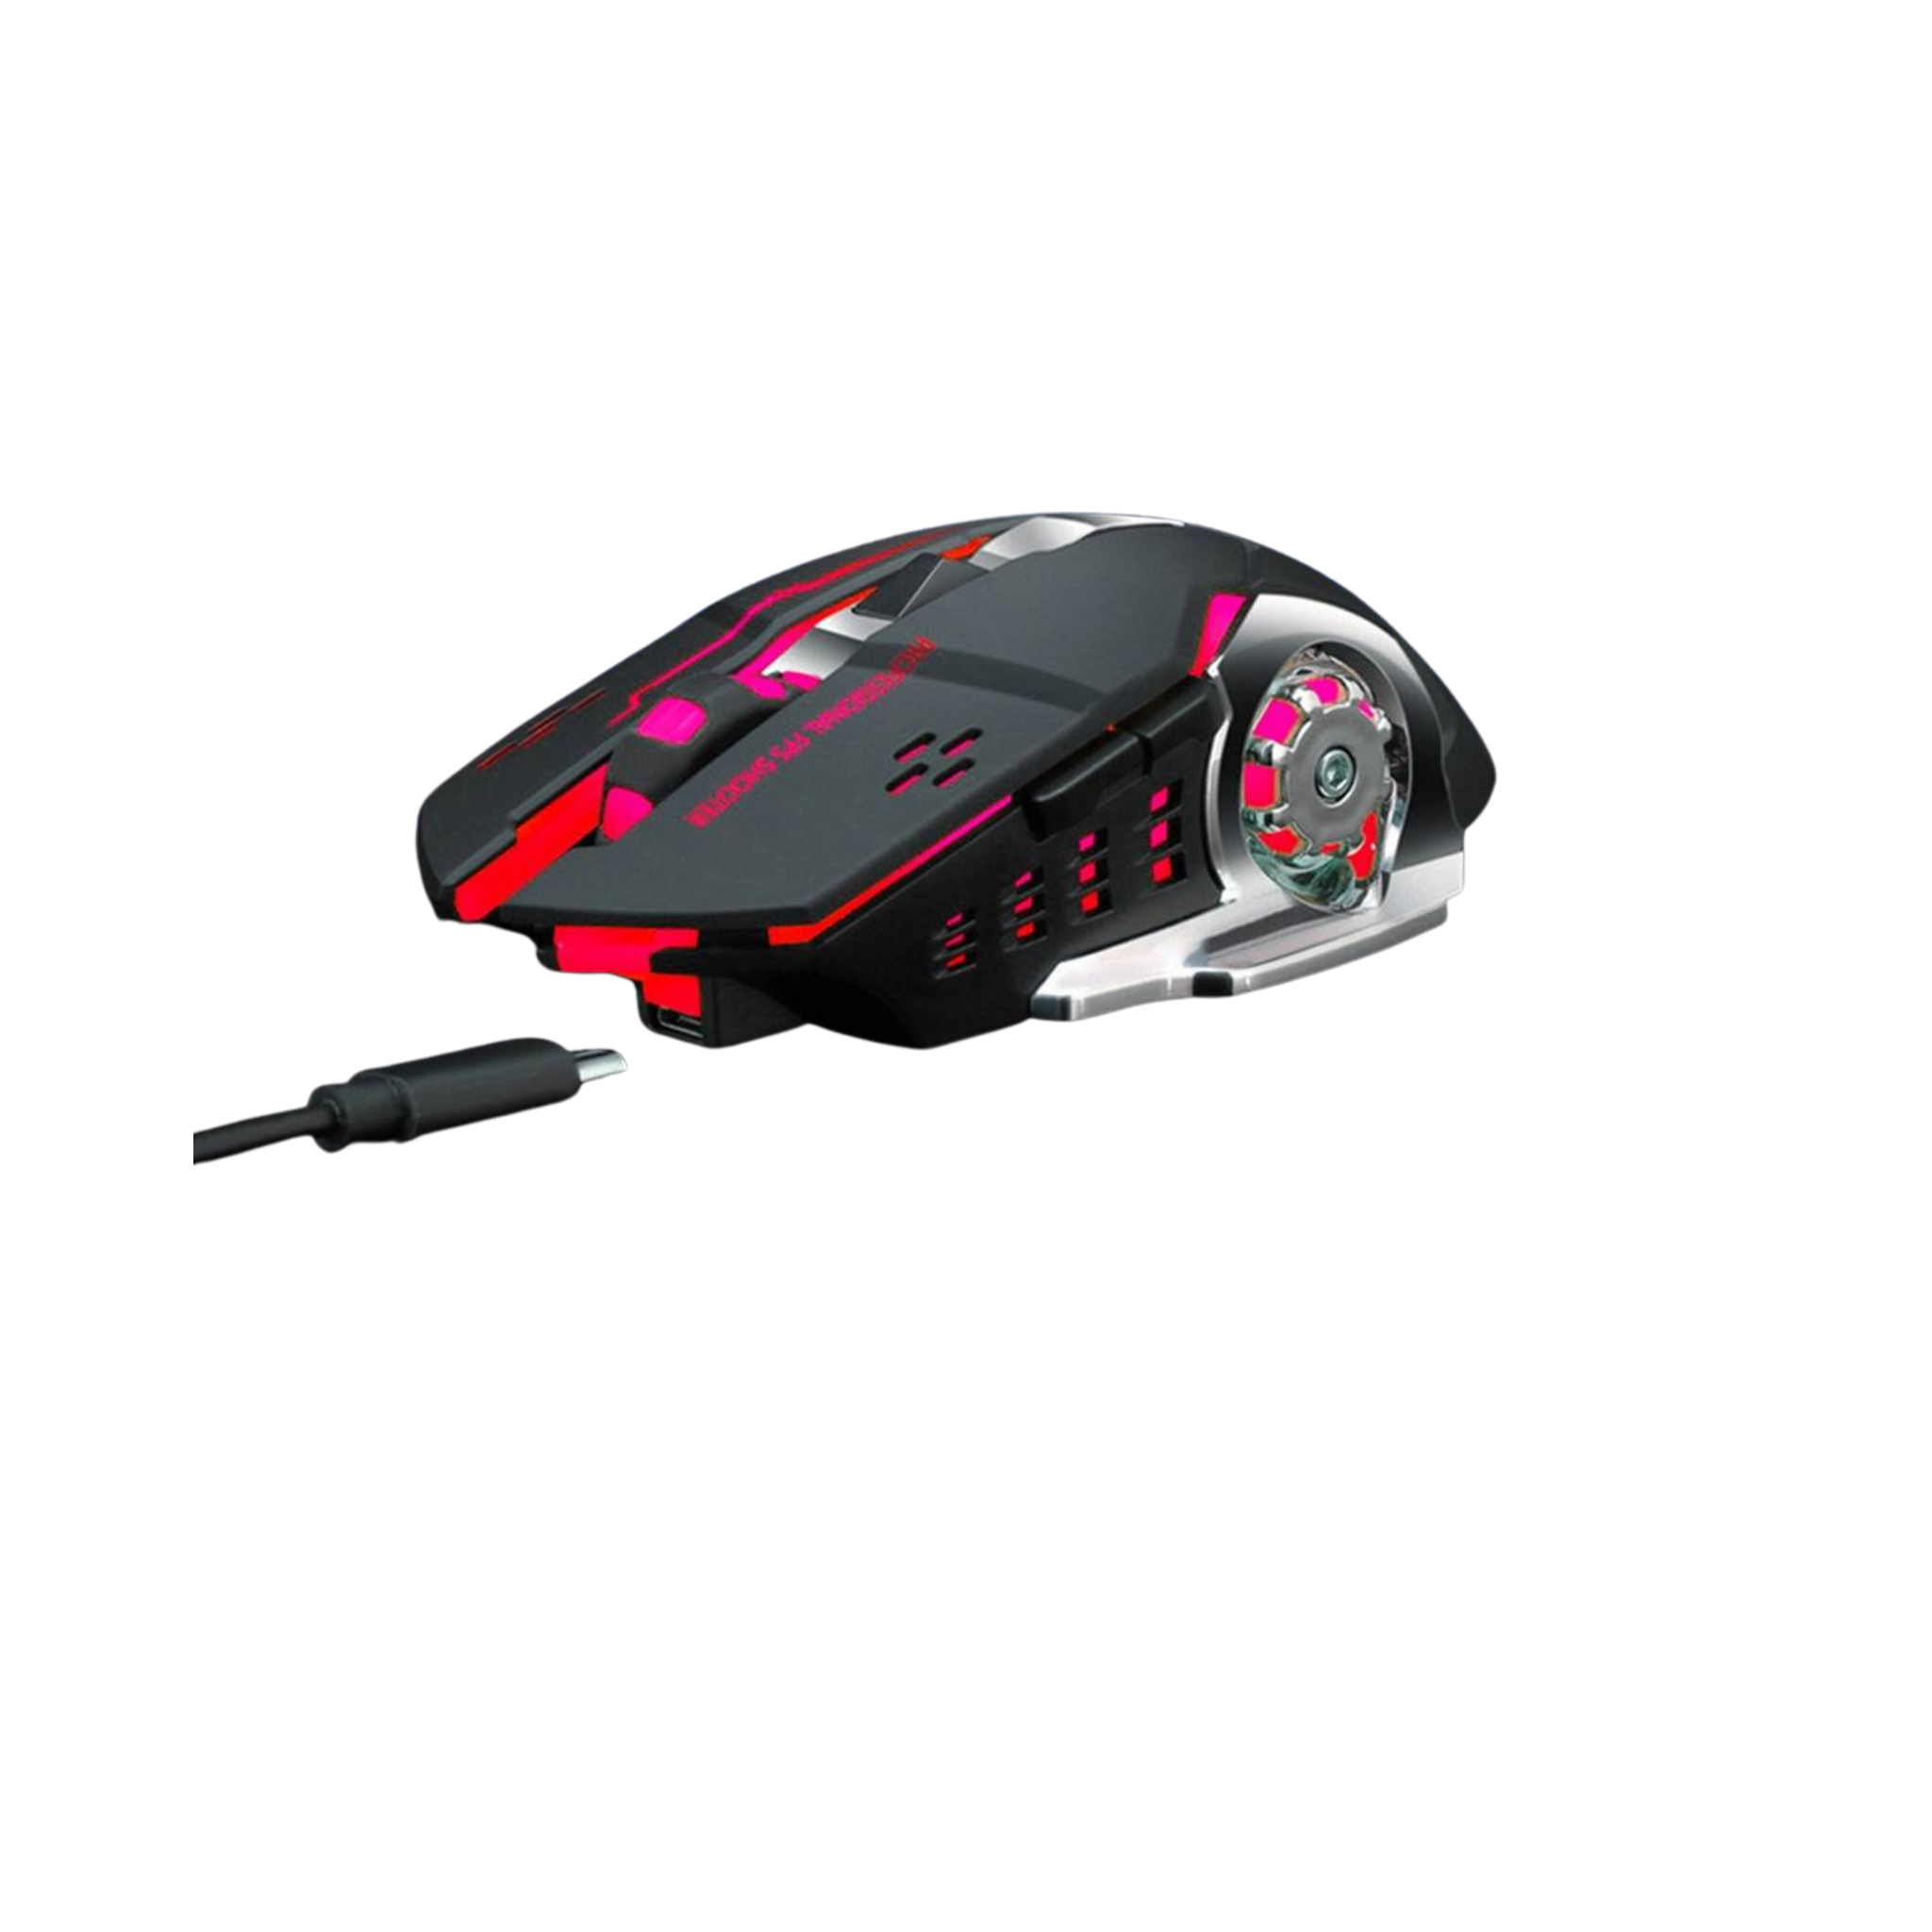 Mouse, Wireless Rechargeable, & 6 Button, for Gaming